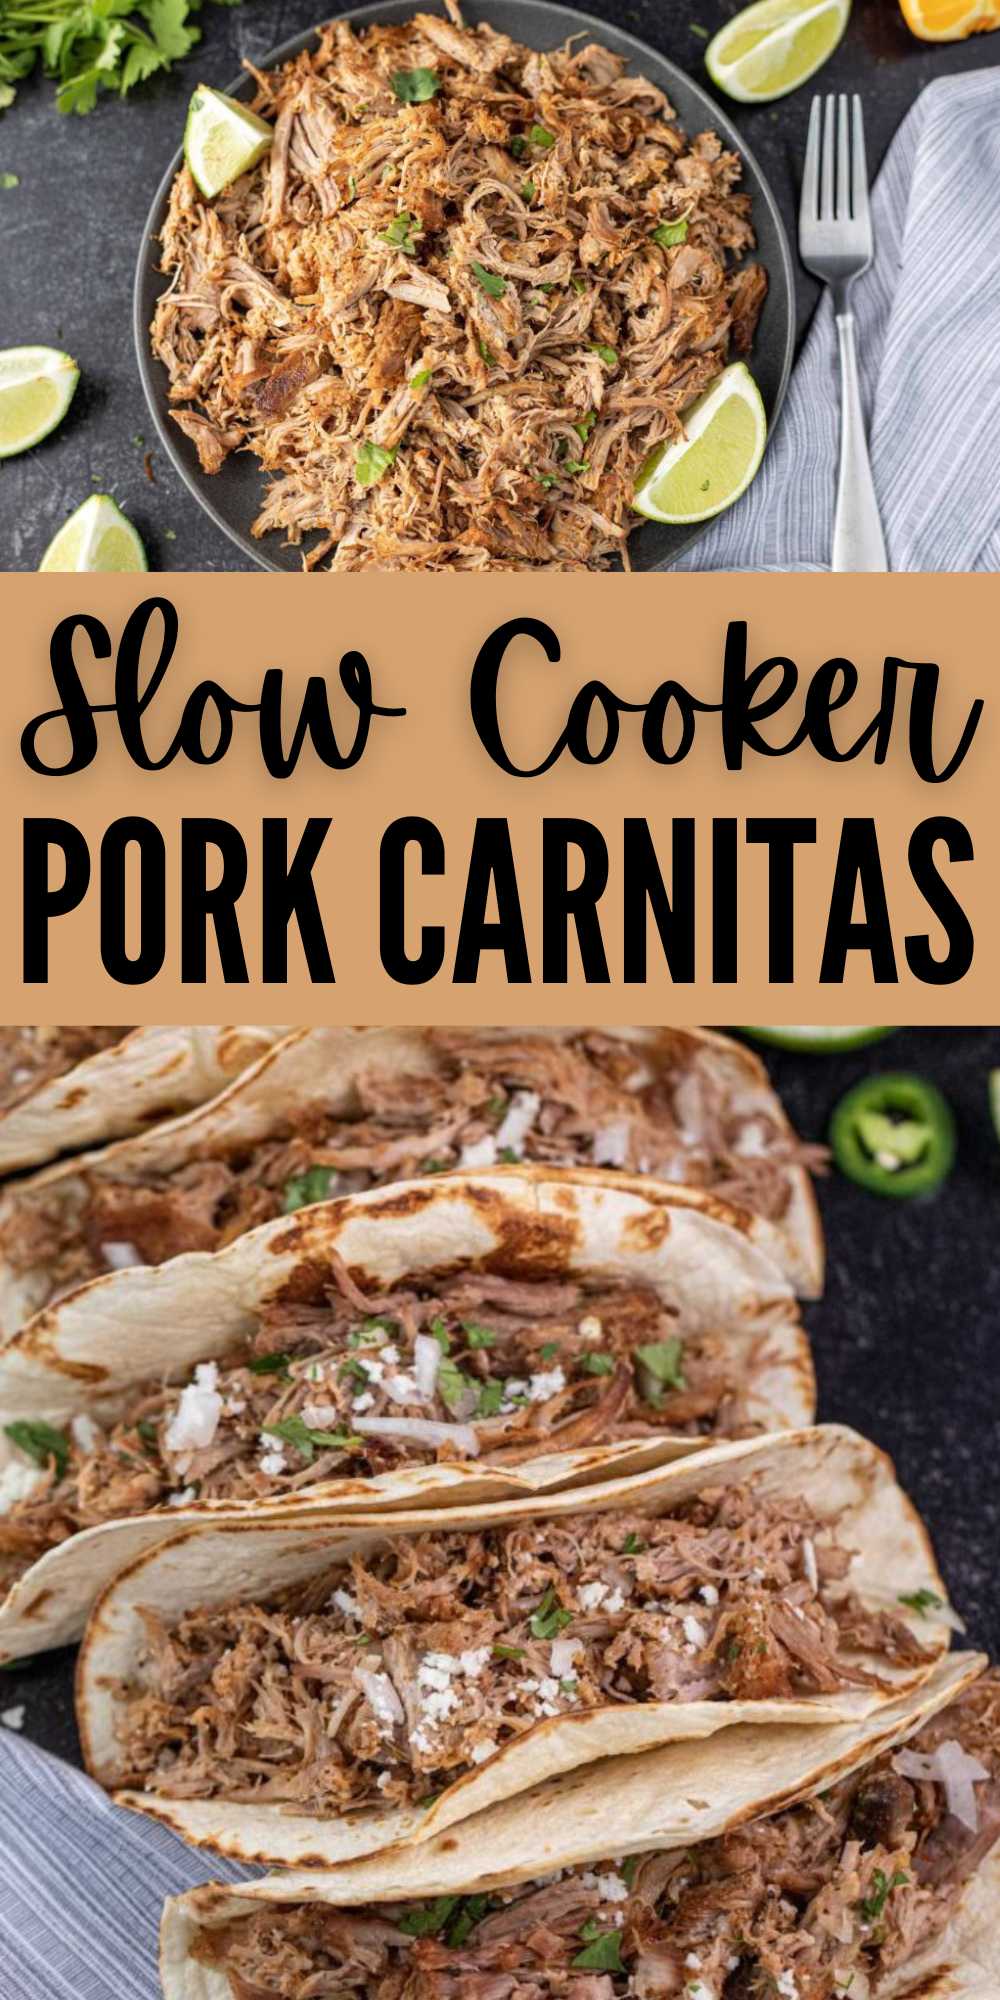 Try authentic Slow Cooker Pork Carnitas Recipe for a meal that is tasty and easy. Make tacos, burritos or salads with this shredded pork. This pork is cooked to perfection. It is tender on the inside and crispy on the outside for an amazing dinner idea. The house smelled amazing from the pork carnitas slow cooking all day. This is the best meal! #eatingonadime #porkcarnitas #crockpotporkcarnitas